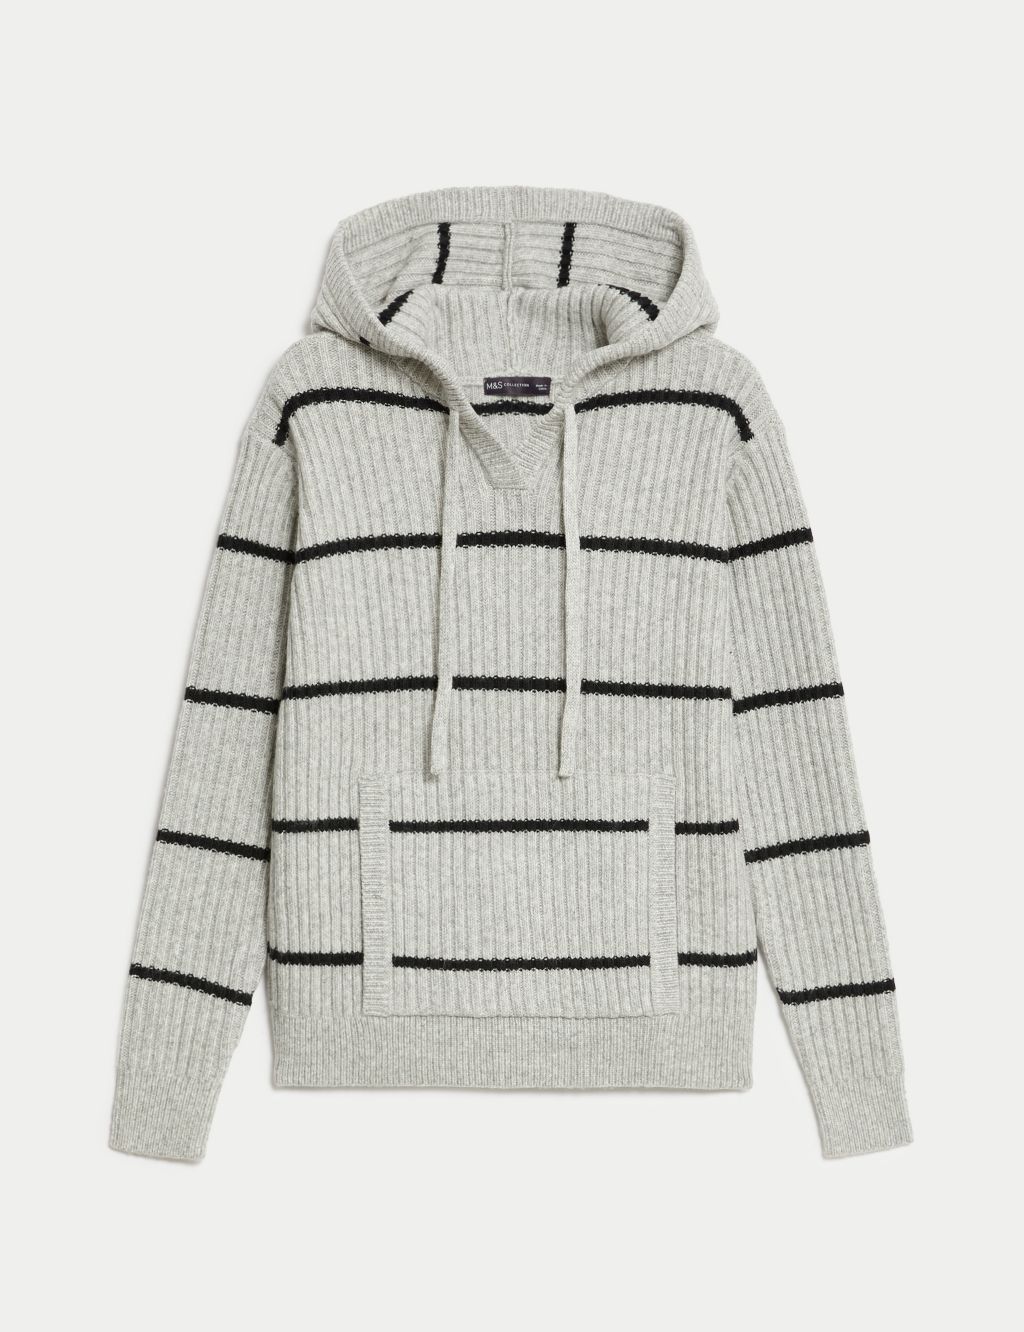 Striped V-Neck Knitted Hoodie image 2